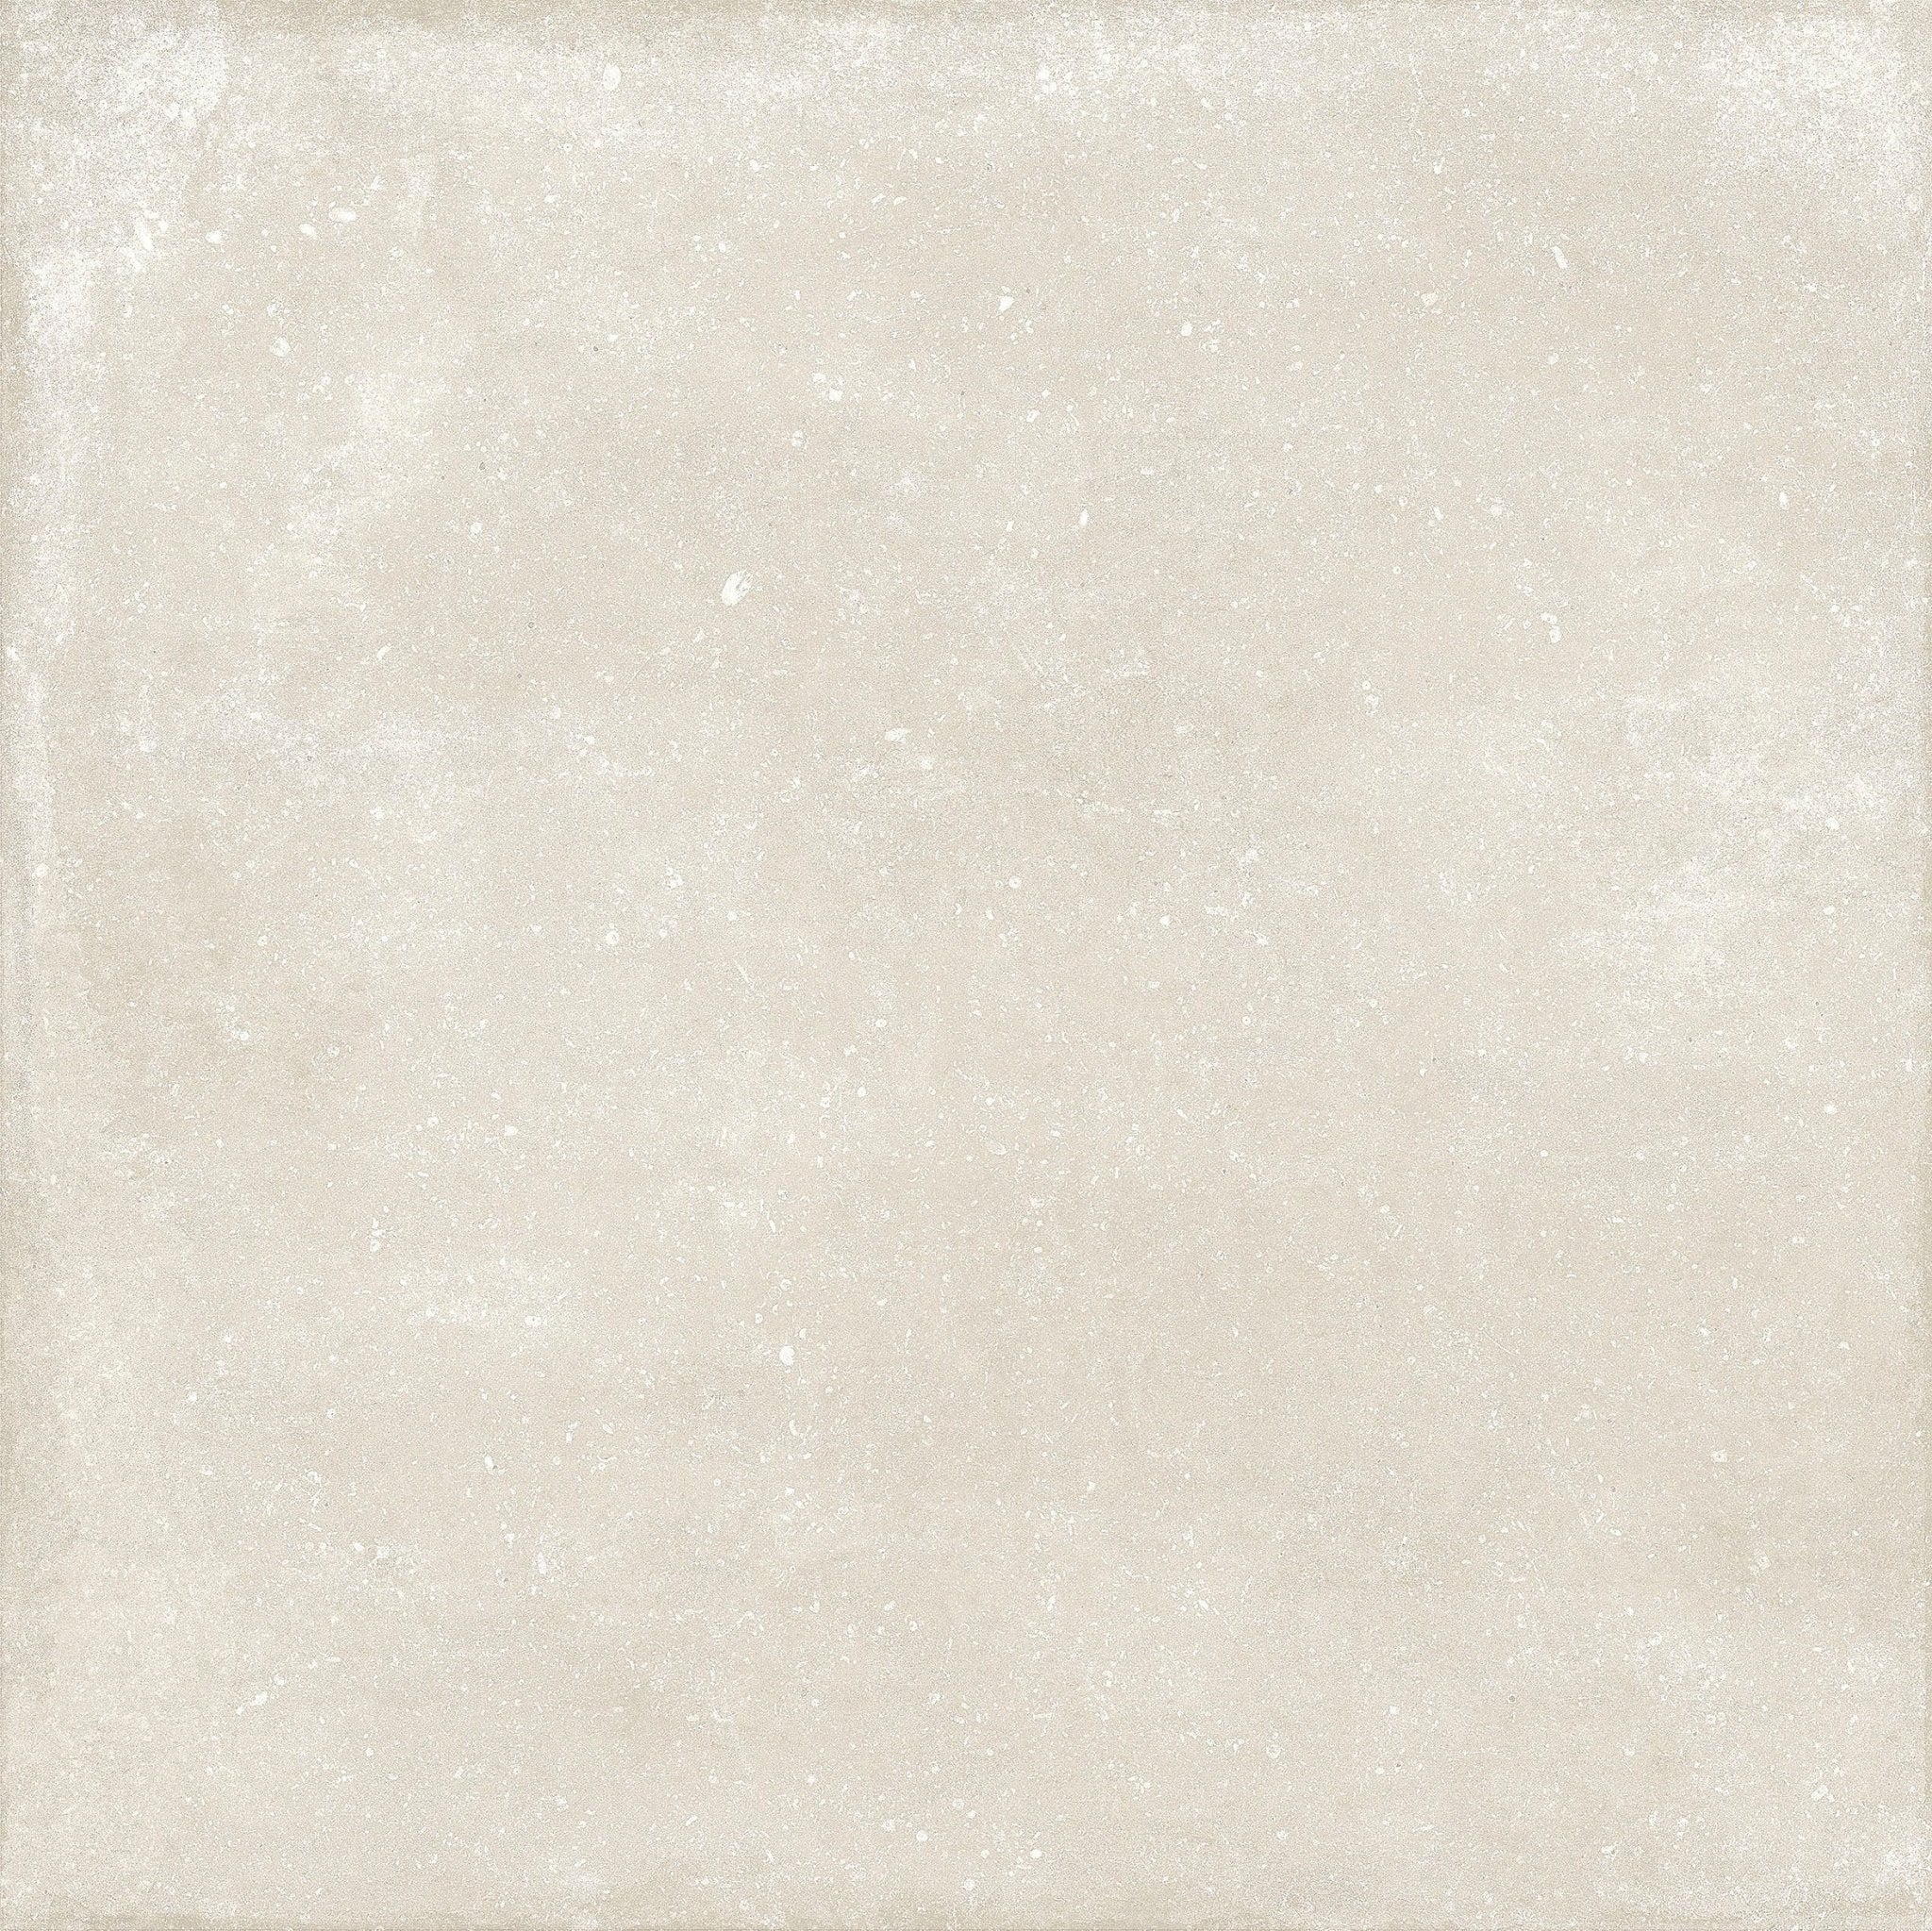 Heritage Sand, 60 x 60cm - Tiles &amp; Stone To You